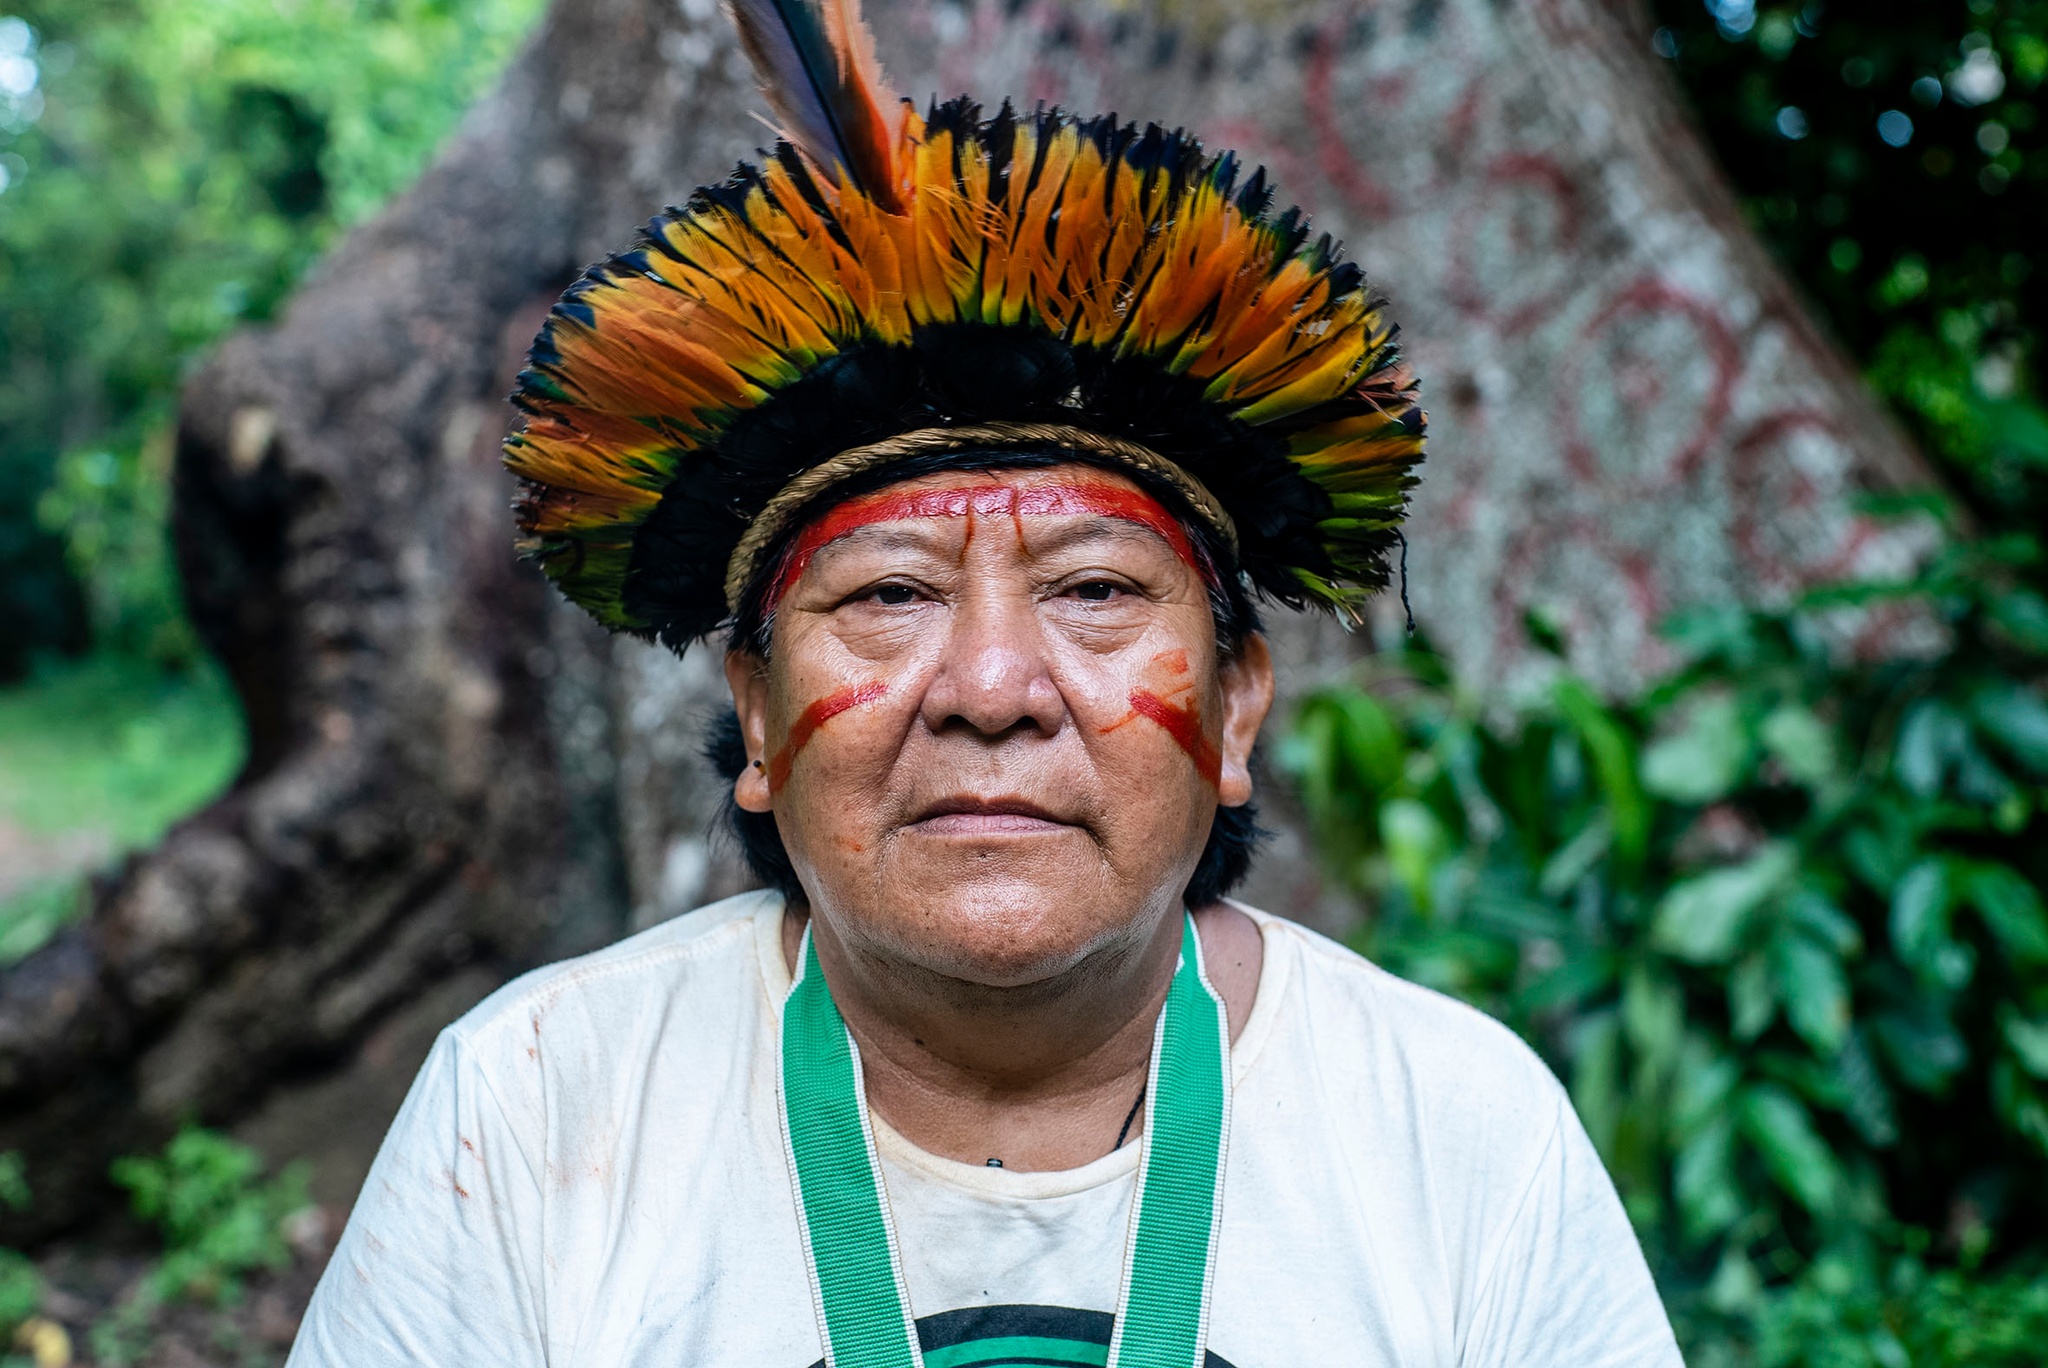 A portrait of shaman and Yanomami leader Davi Kopenawa. An Indigenous Yanomami man sitting in front of a wide tree trunk and lush leaves and other undergrowth. He wears a white t-shirt, a green ribbon around his neck and an array of red and orange feathers across his forehead. 